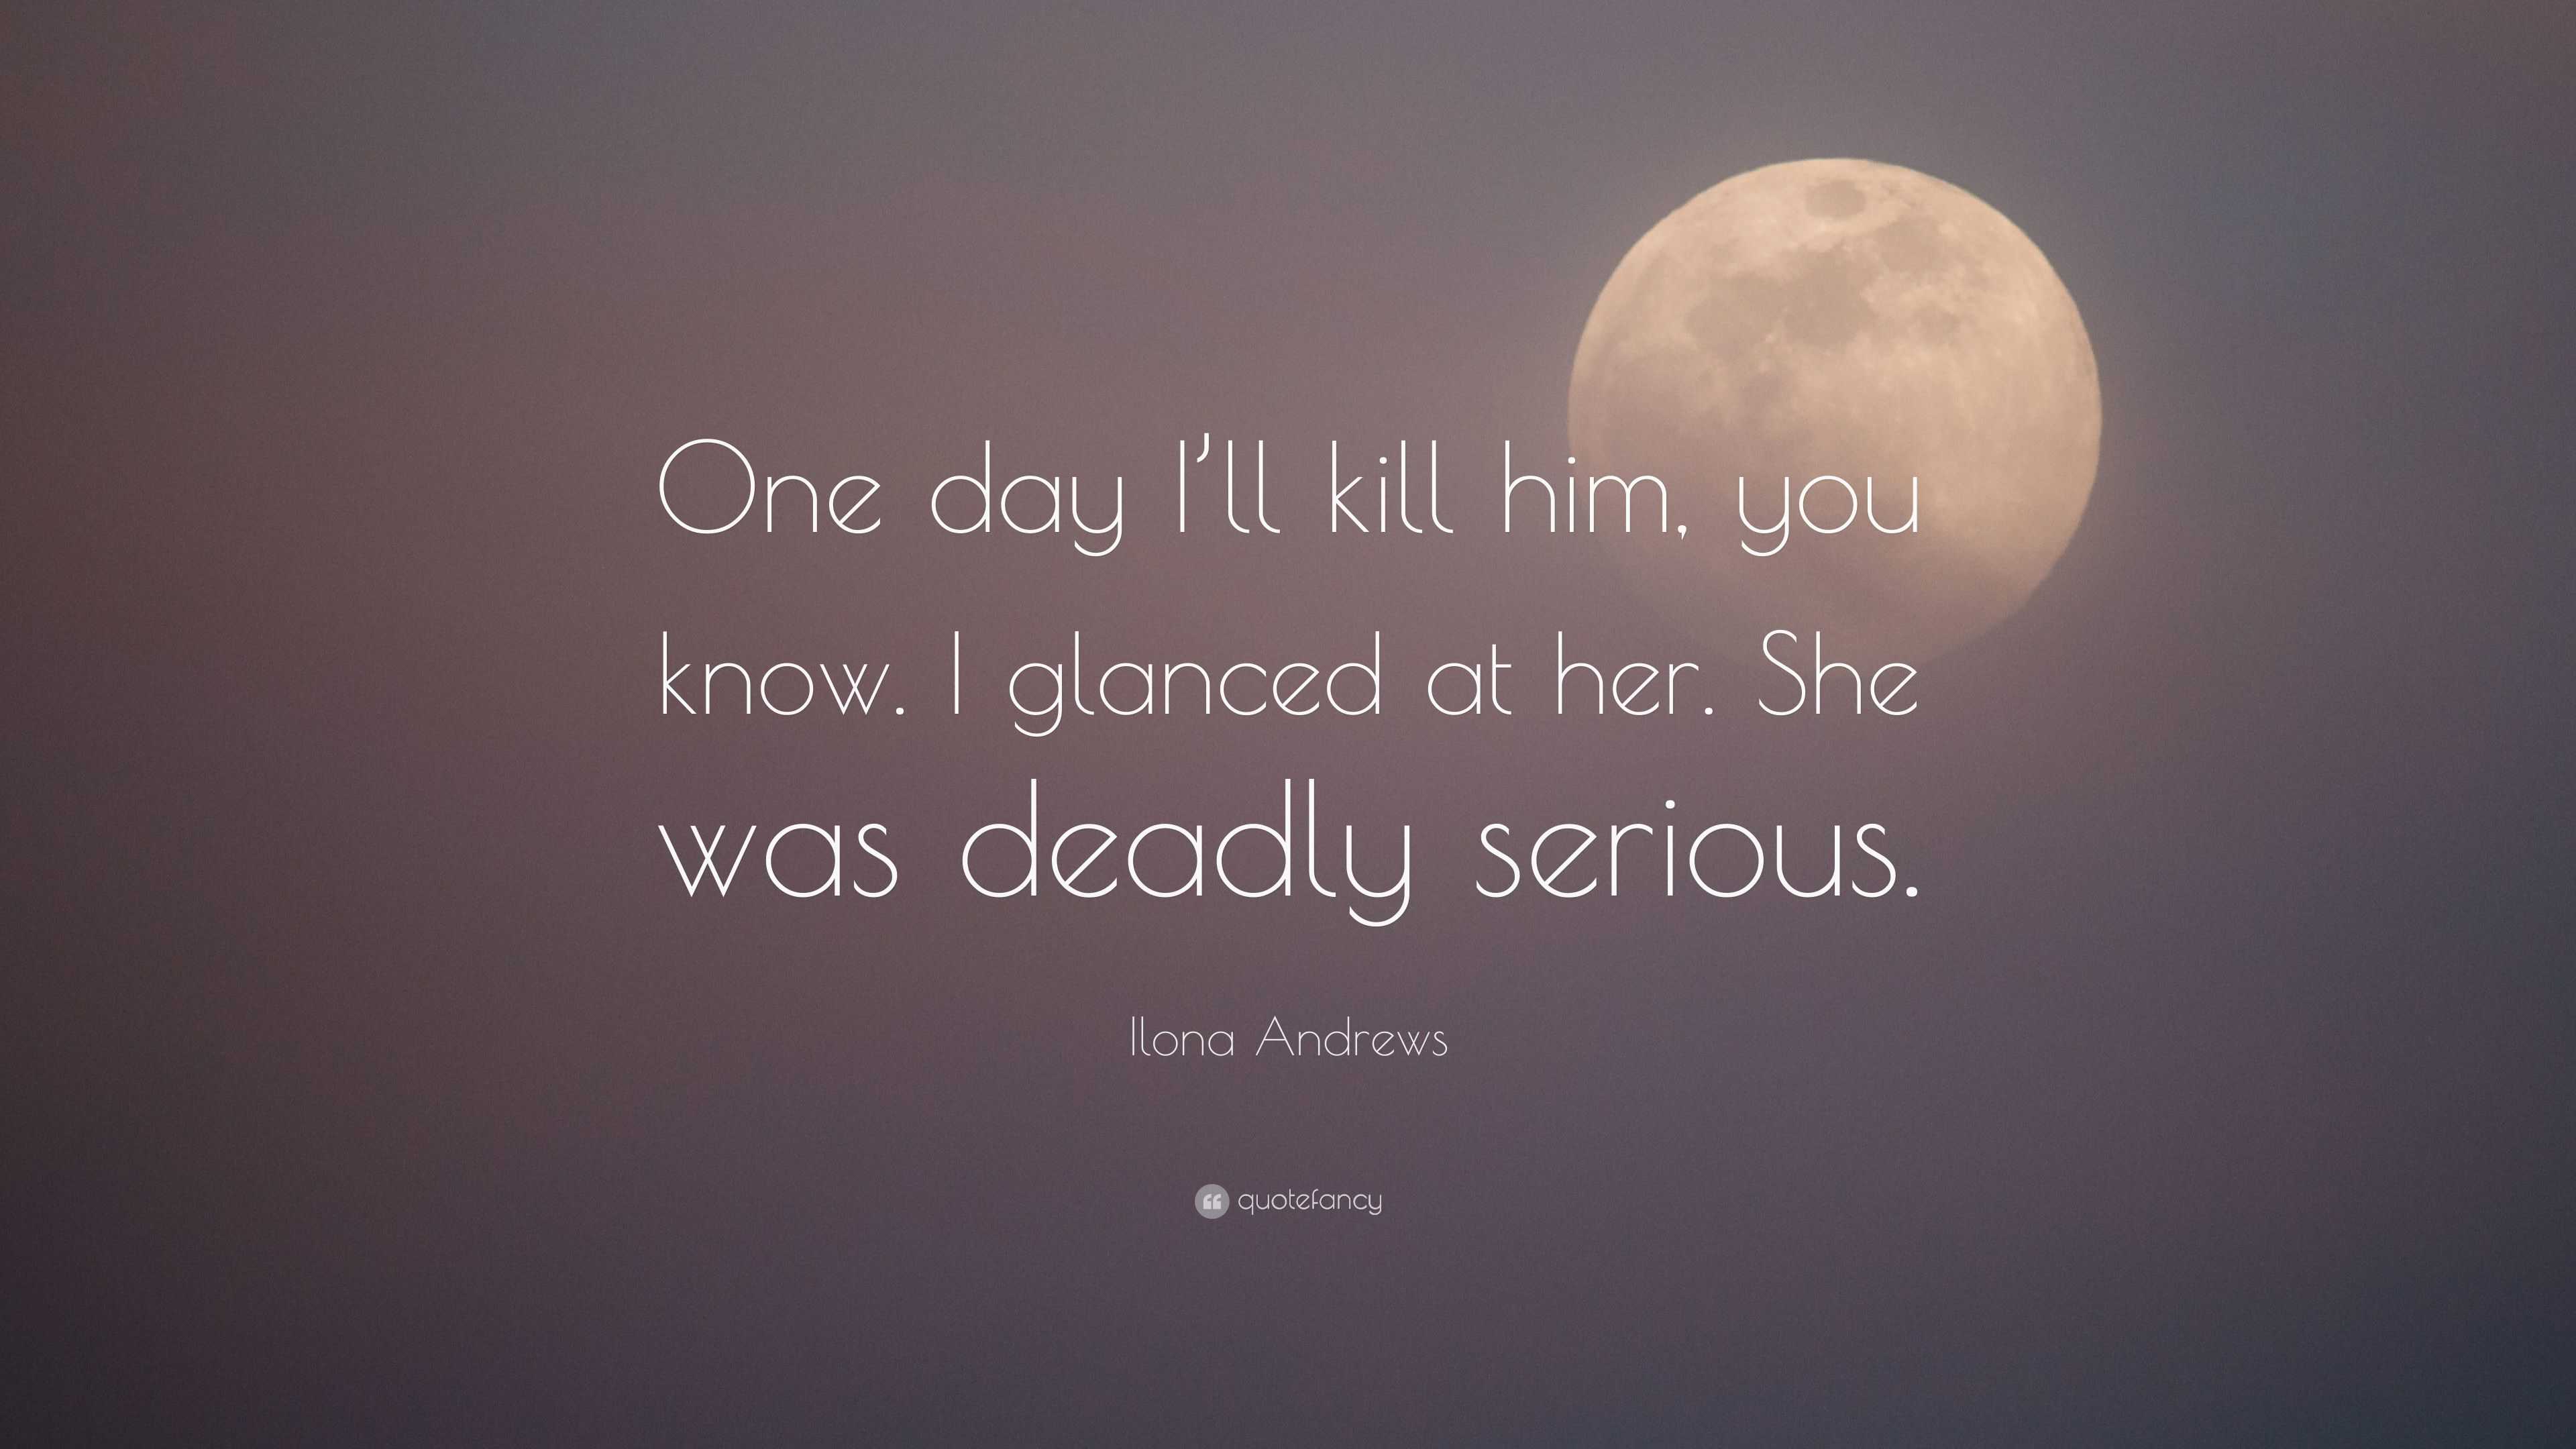 Ilona Andrews Quote: “One day I’ll kill him, you know. I glanced at her ...